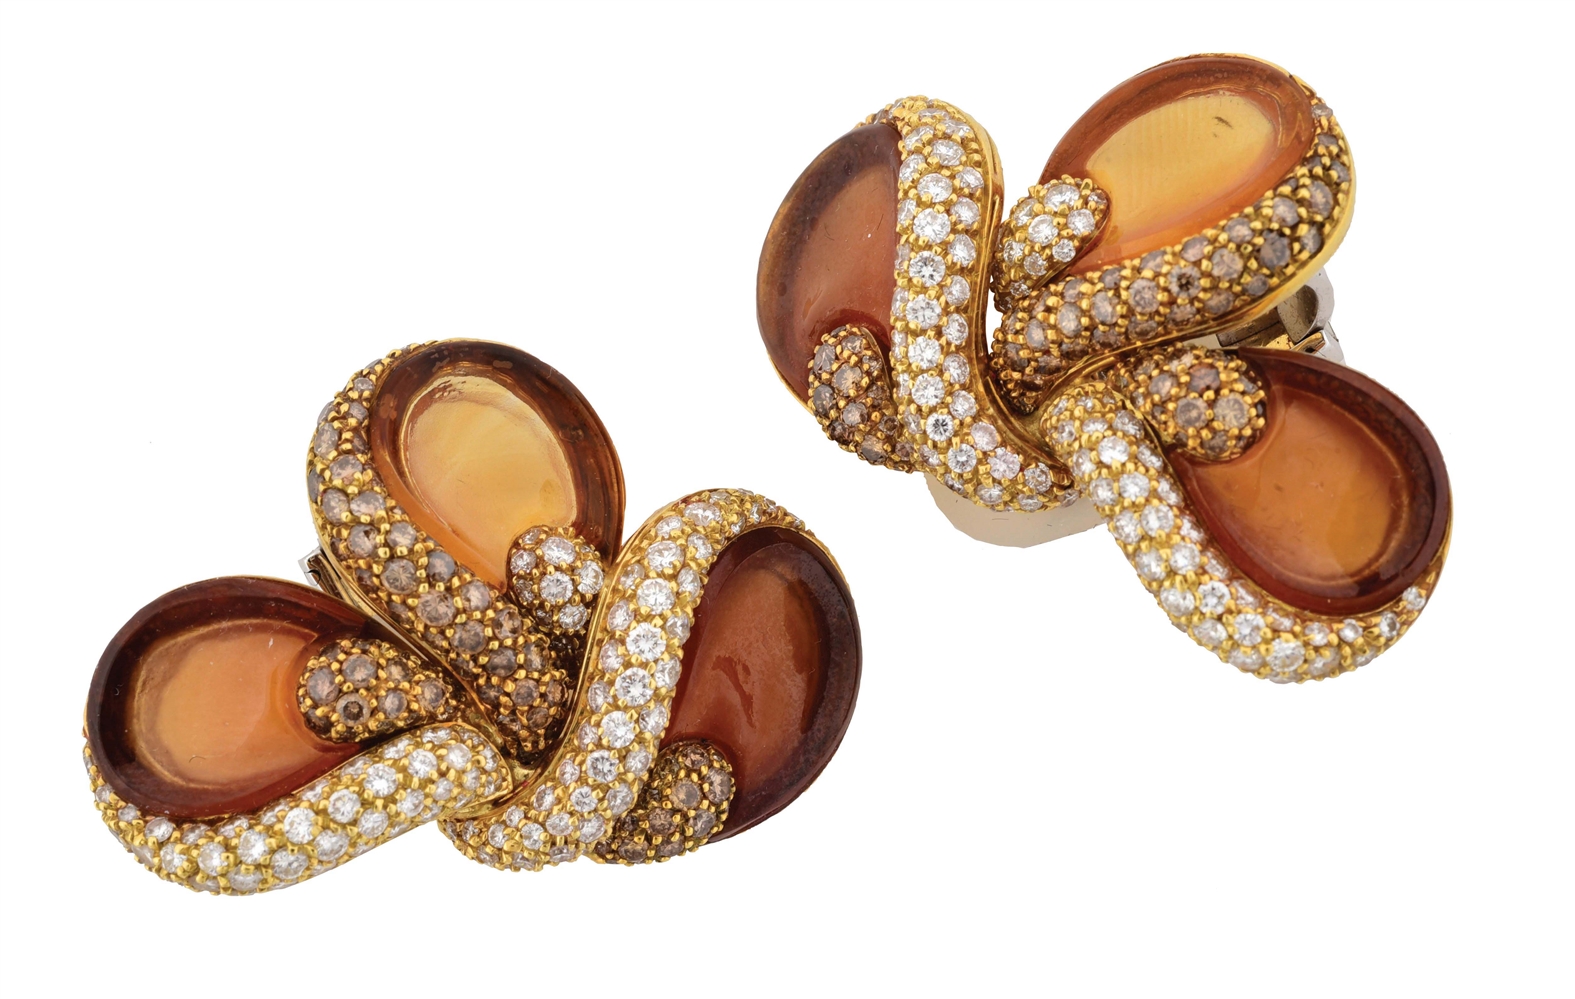 18K YELLOW GOLD DIAMOND FASHION EARRINGS WITH BROWN GLASS ACCENTS AND VALUATION REPORT.